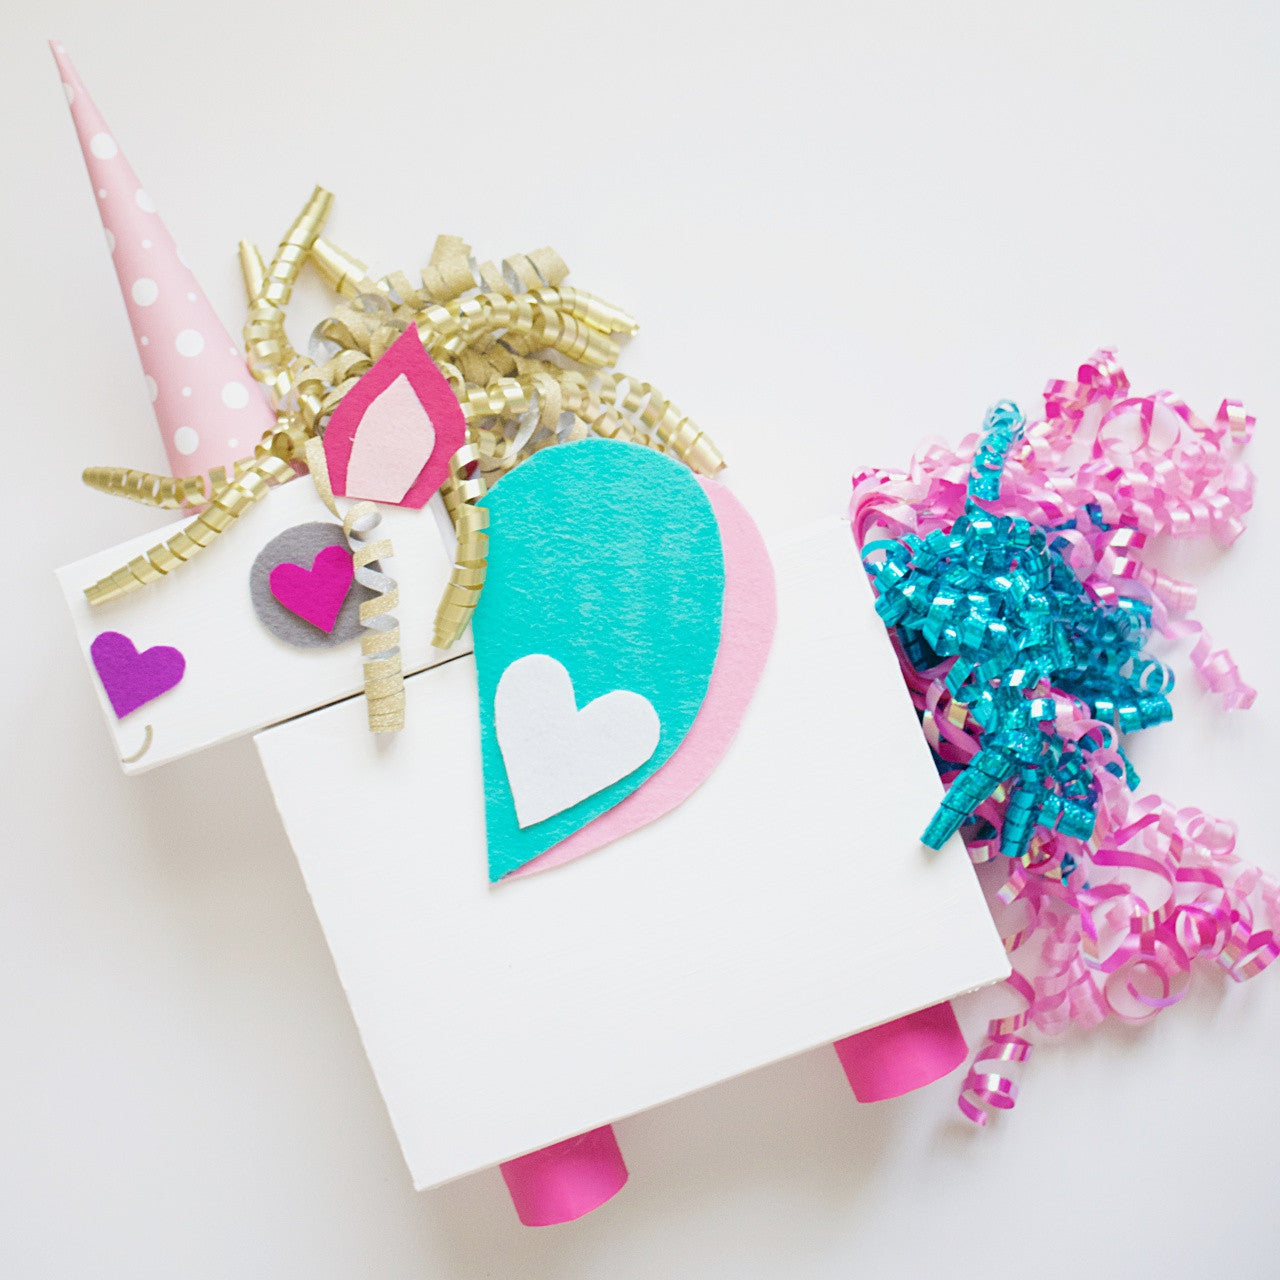 65 Valentine's Day Messages To Write in a Card - Parade